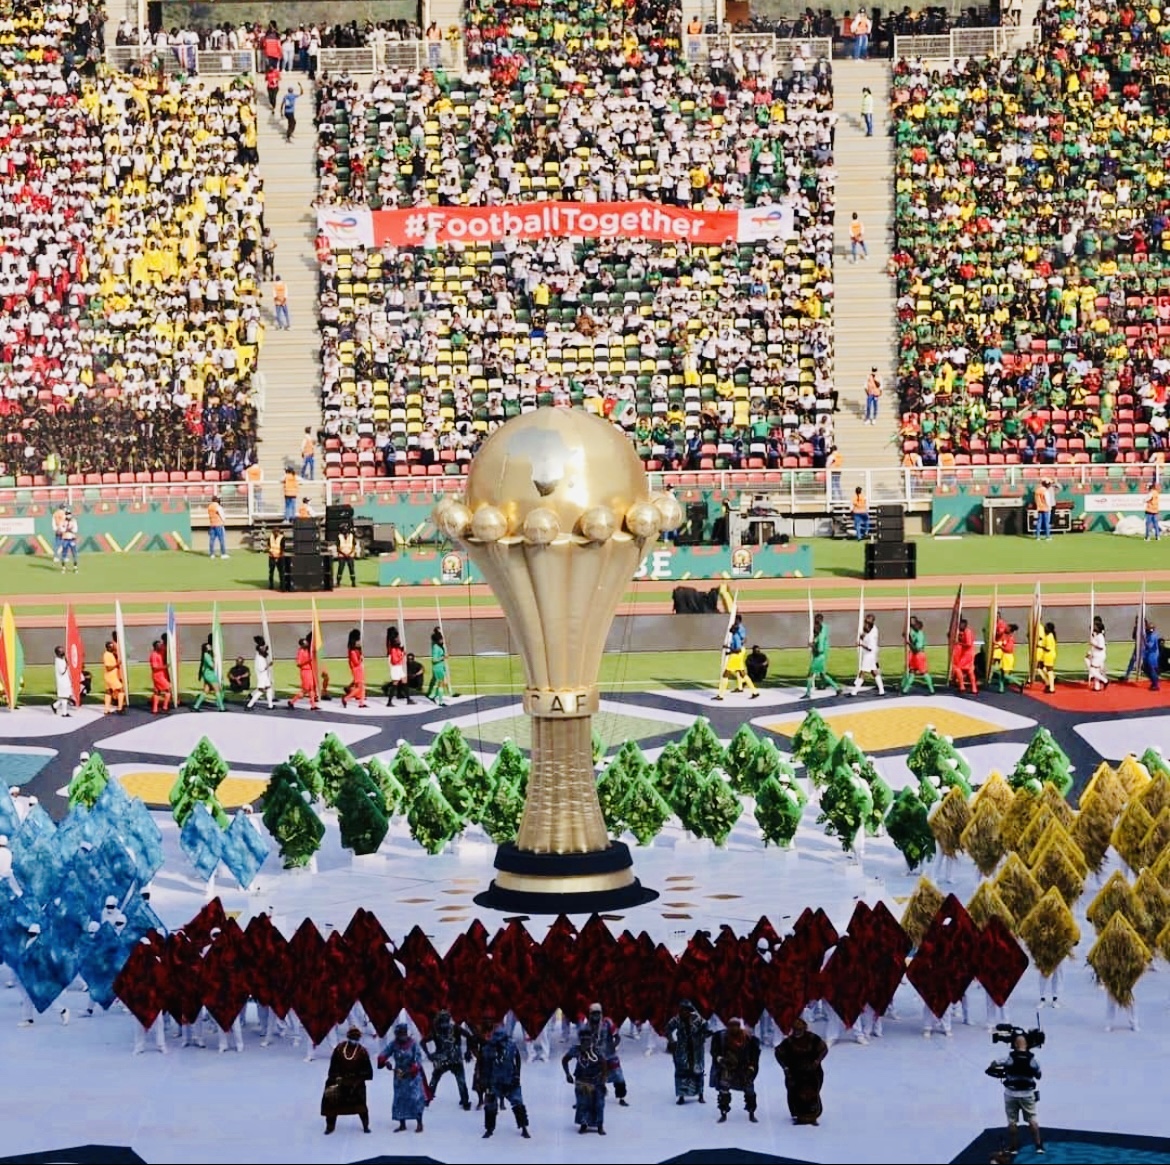 Photo News: One Year After Postponement, AFCON 2021 Kicks Off Under Strict COVID-19 Rules